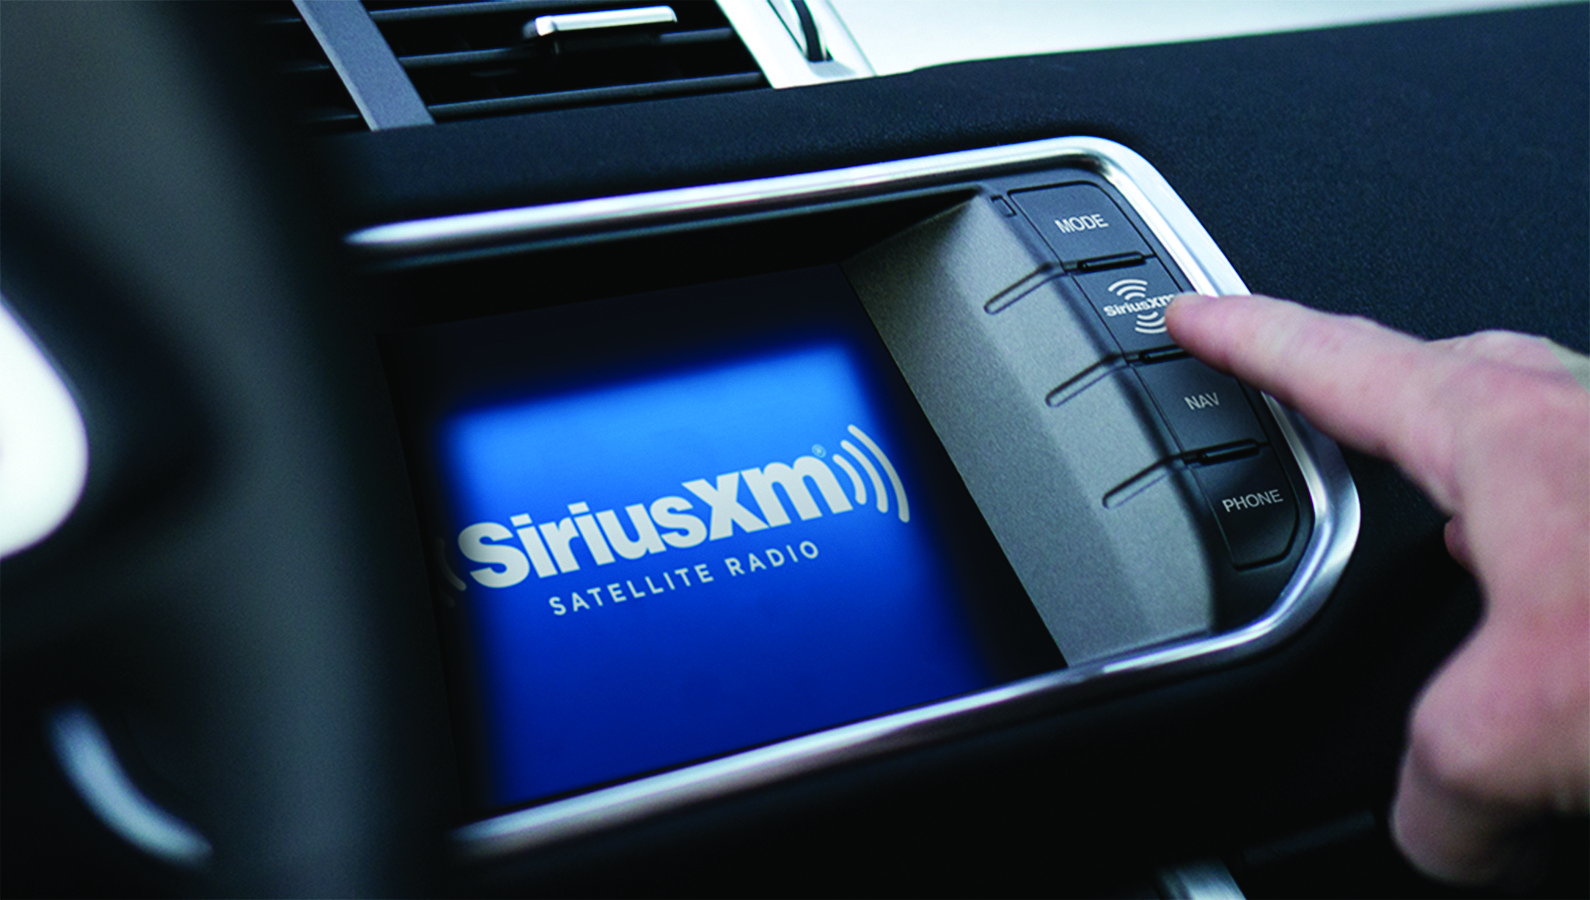 Free 3-Months of SiriusXM For Amazon Customers!